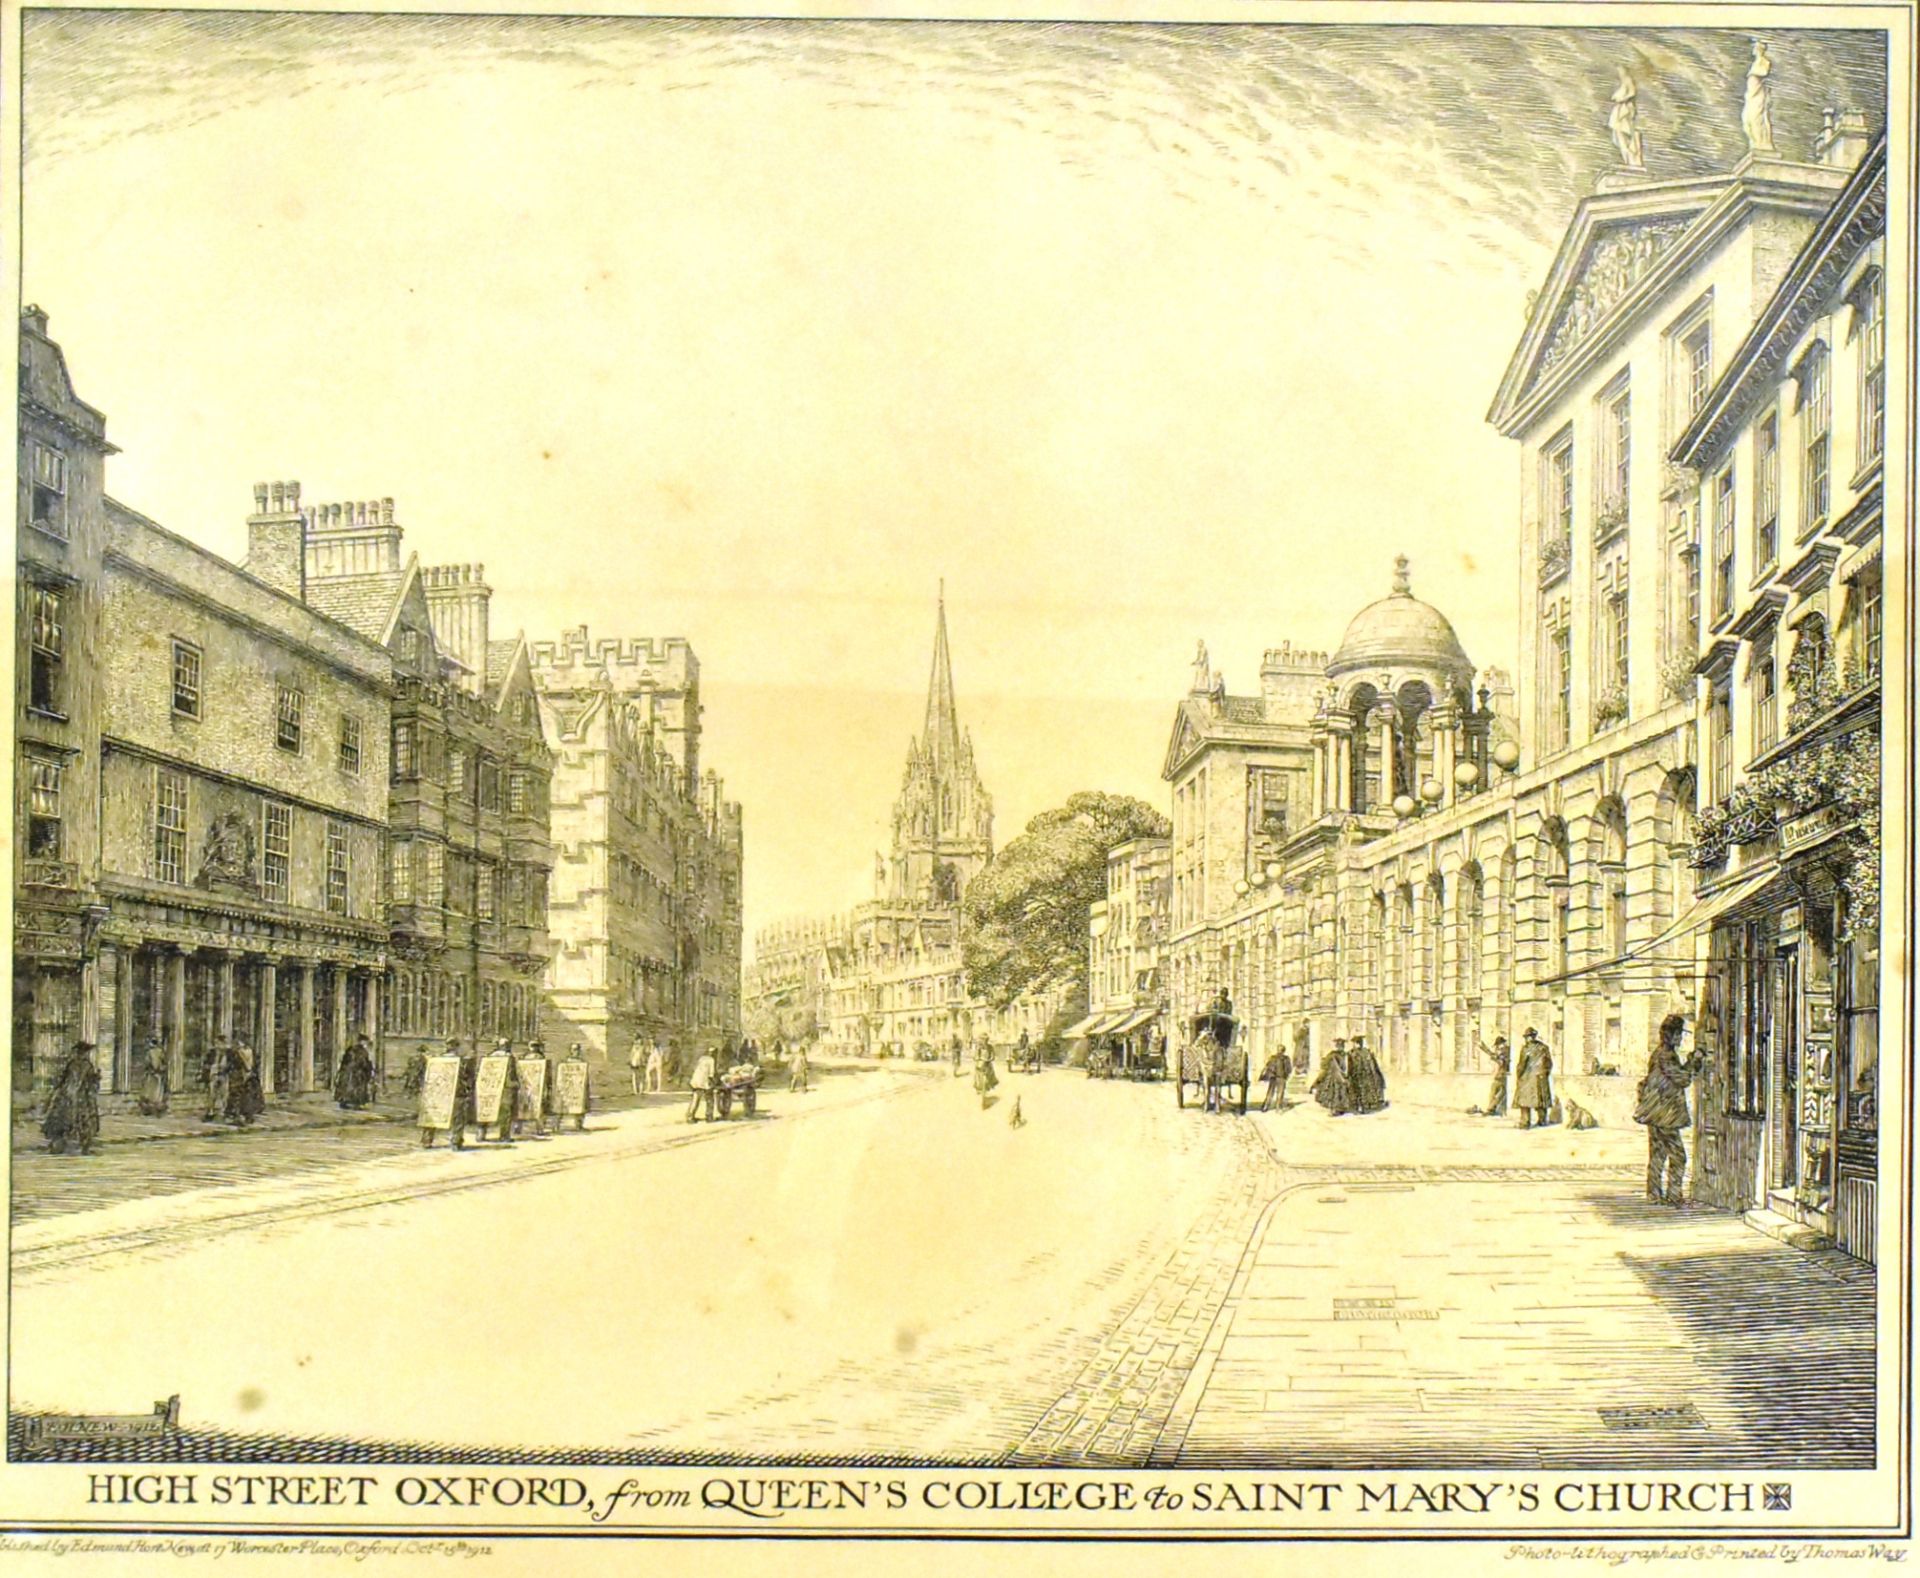 EDMUND HORT NEW - PHOTO LITHOGRAPH PRINT OF HIGH STREET OXFORD - Image 2 of 5